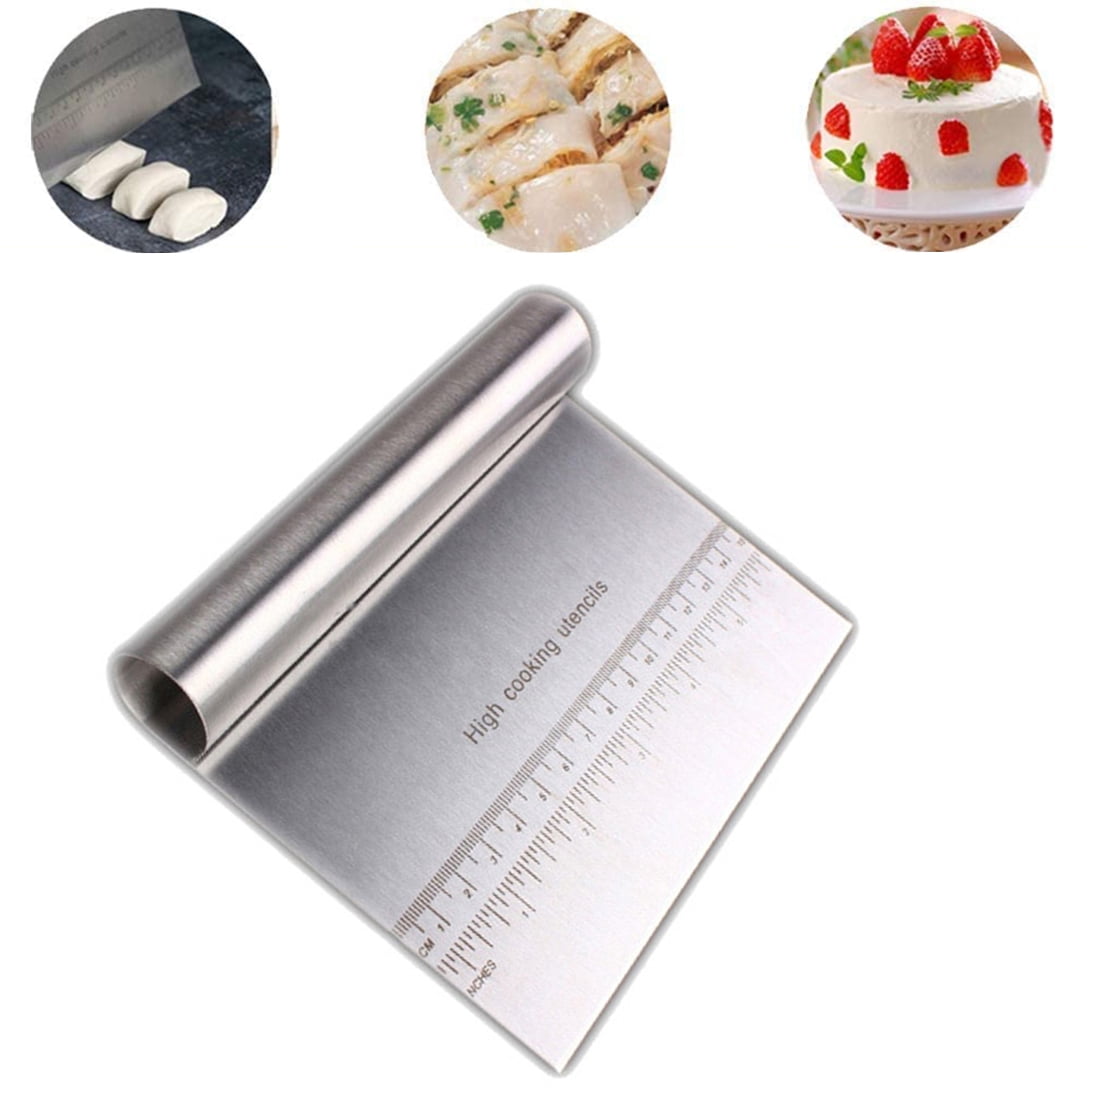 Stainless Steel Pizza Dough Scraper Cutt Flour Pastry Kitchen Cake Baking Too mZ